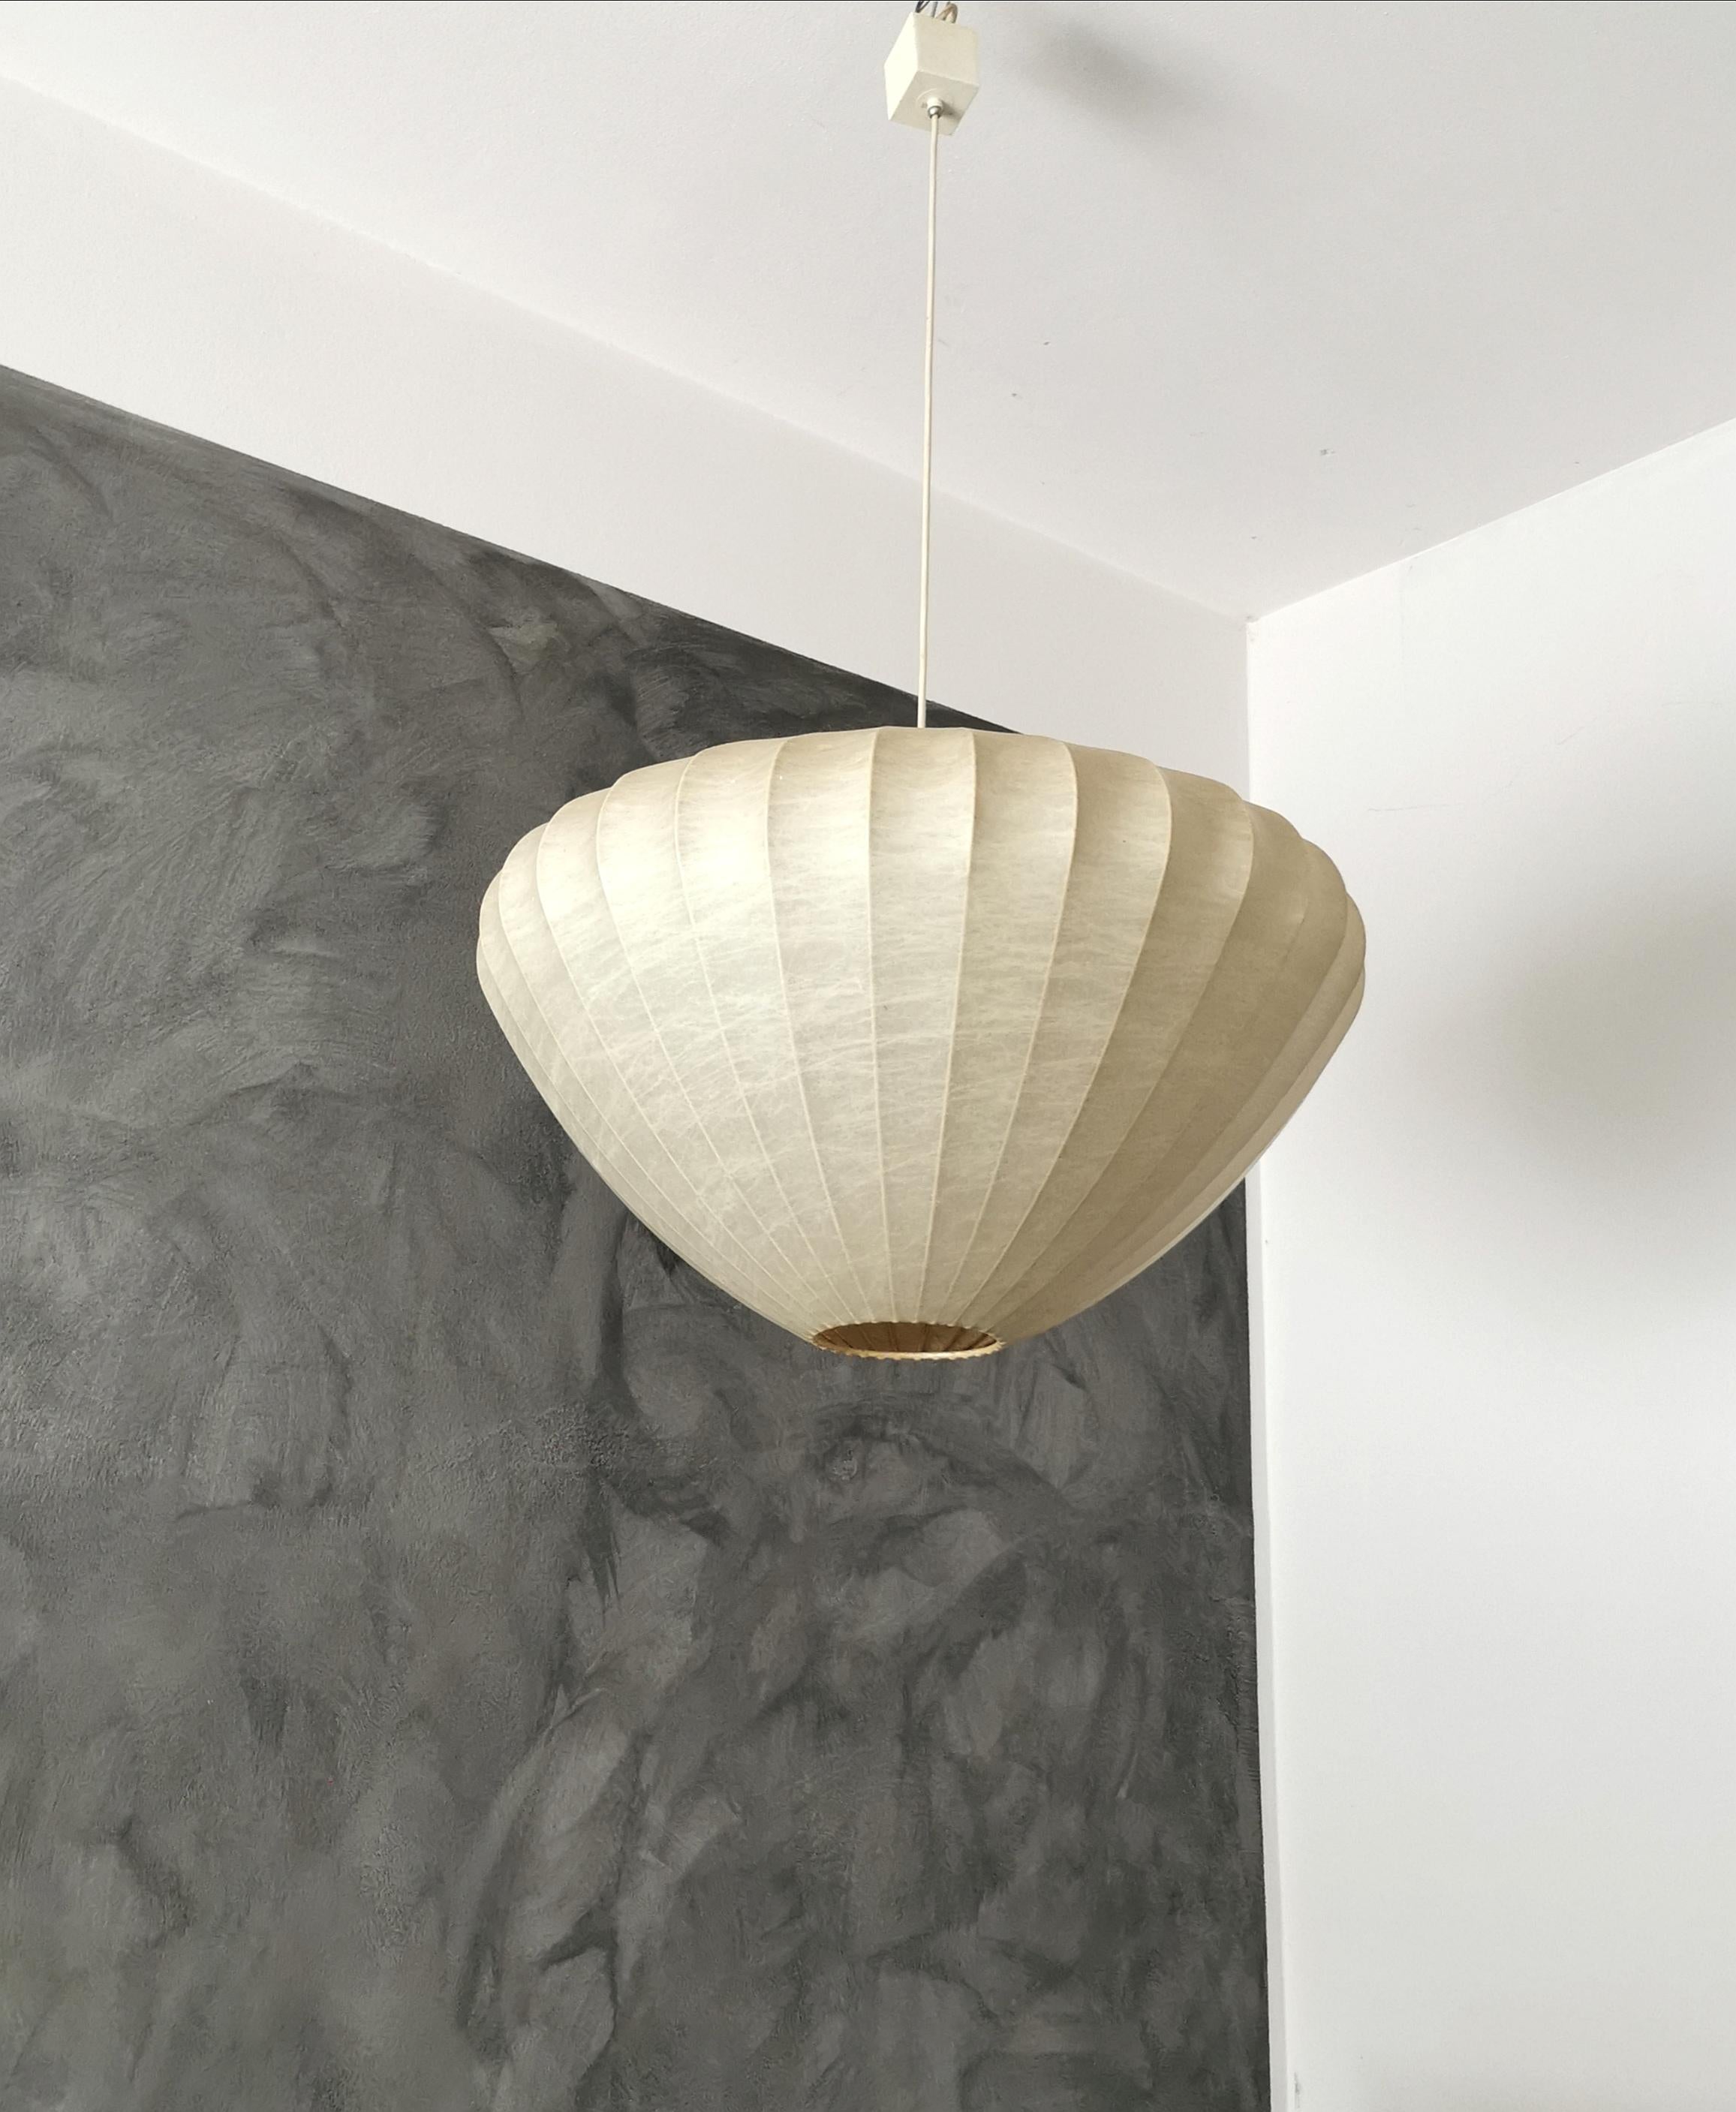 Midcentury Cocoon Pendant by Achille Castiglioni at 2-Light, Italy, 1960s 3